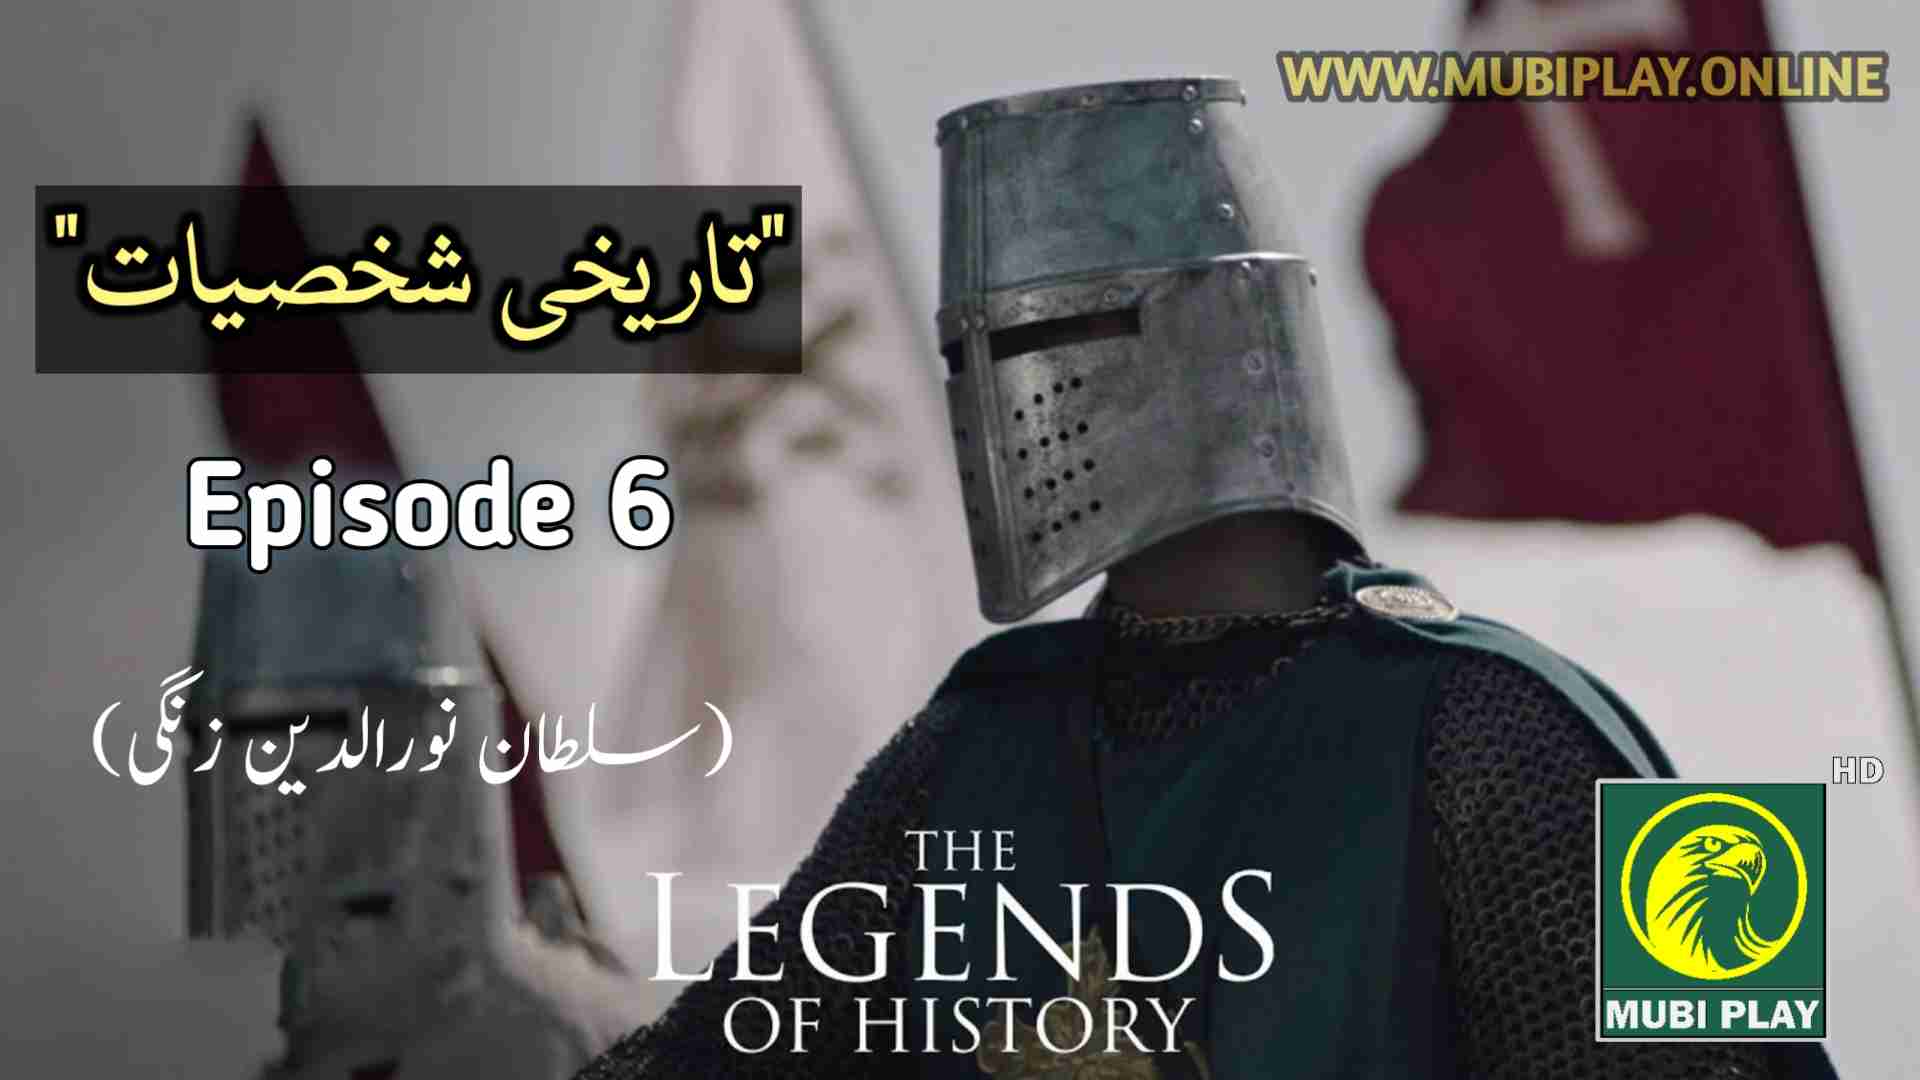 Legends of History Episode 6 with Urdu Subtitles by MubiPlay